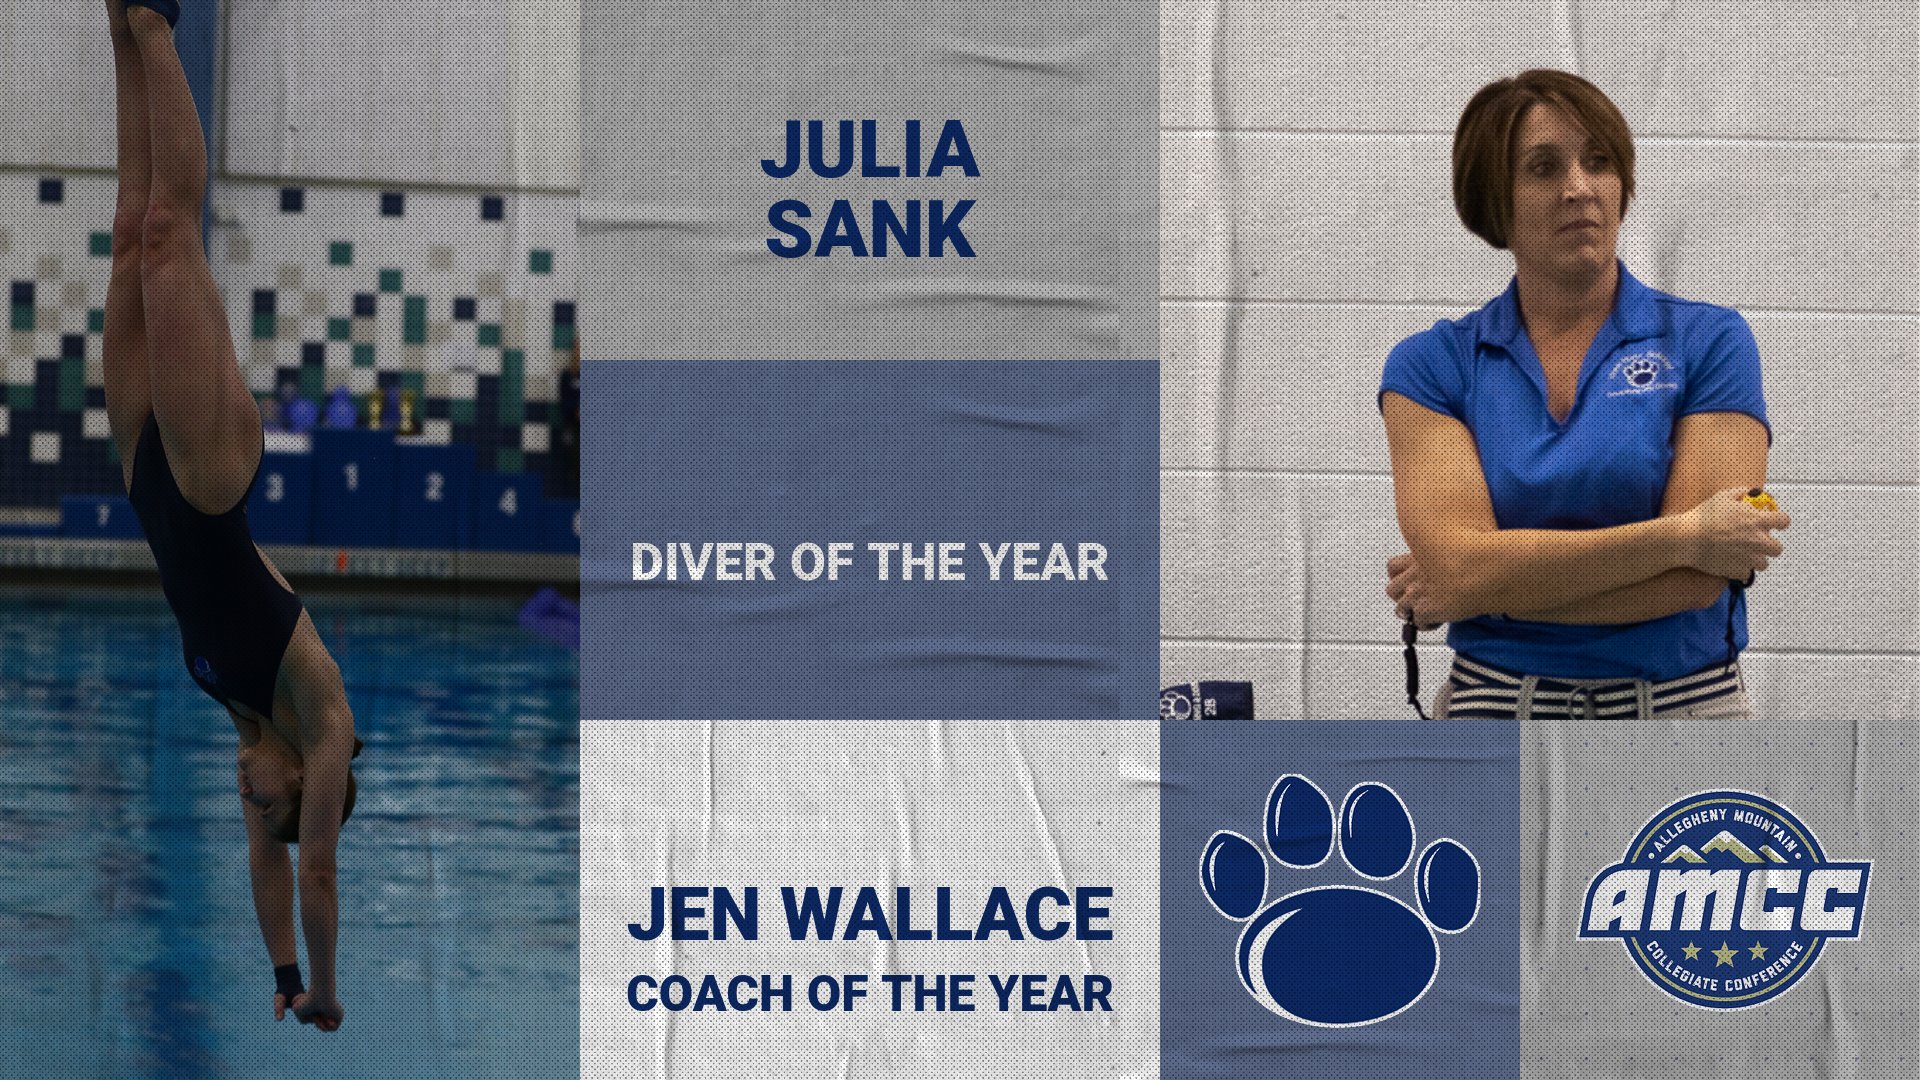 Seven Named All-AMCC; Sank Named Diver of the Year, Wallace Coach of the Year